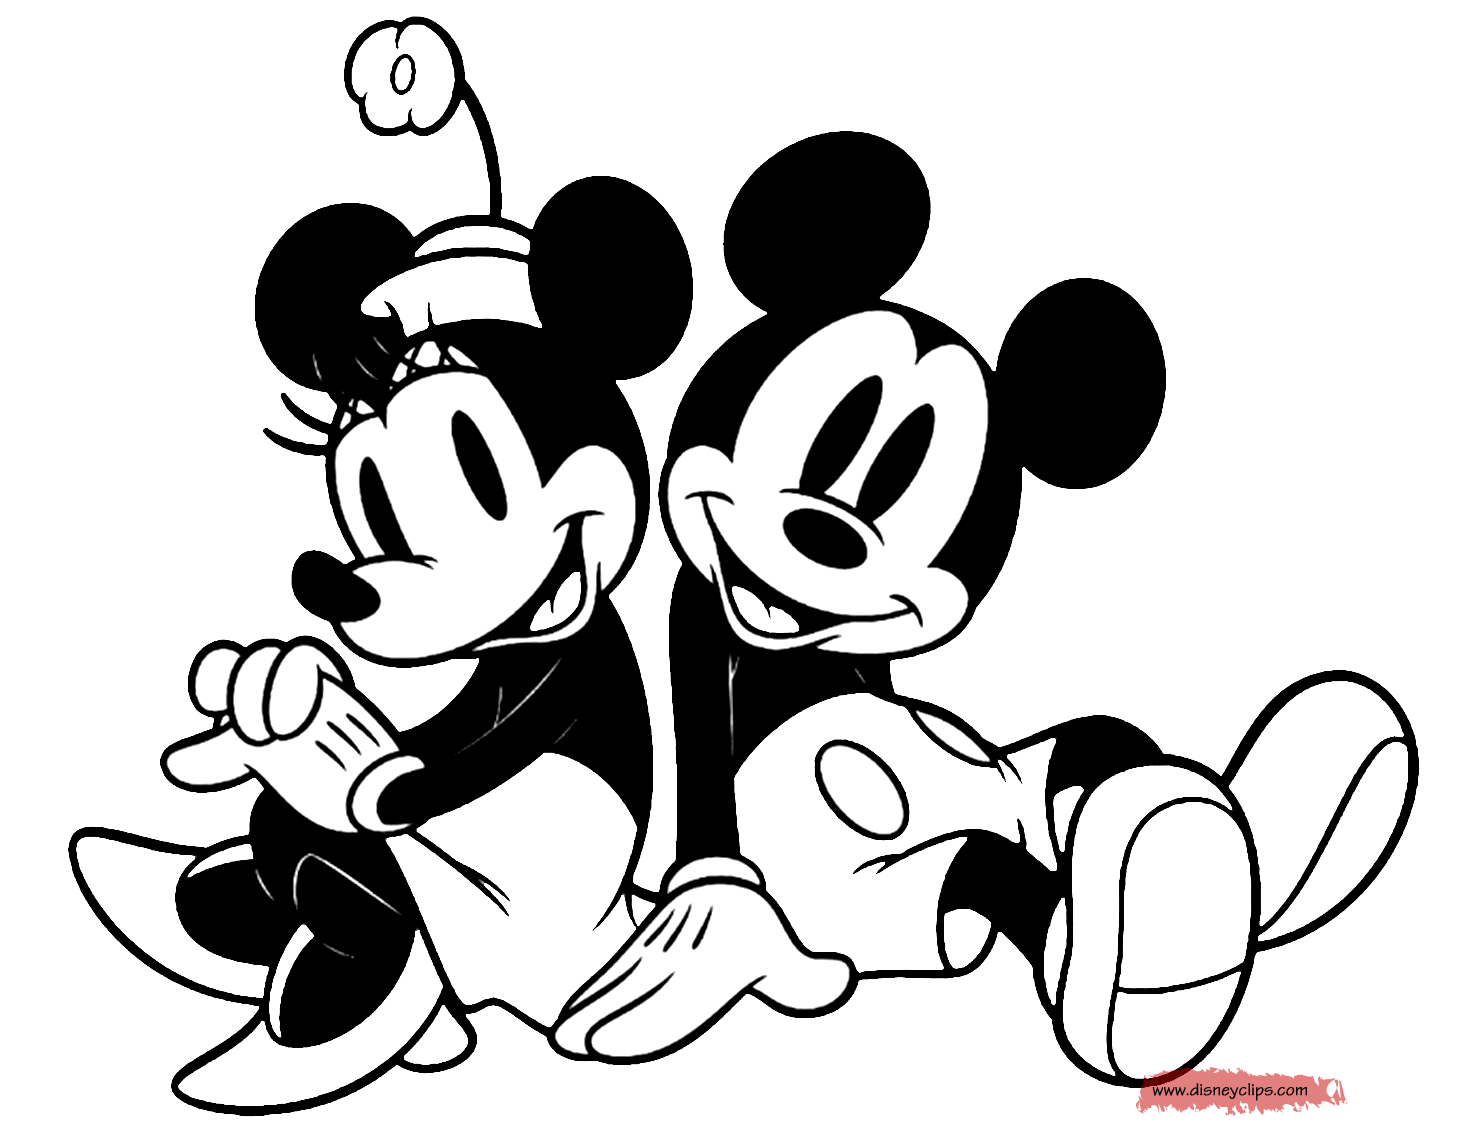 Classic Mickey and Friends Coloring Pages | Disneyclips.com